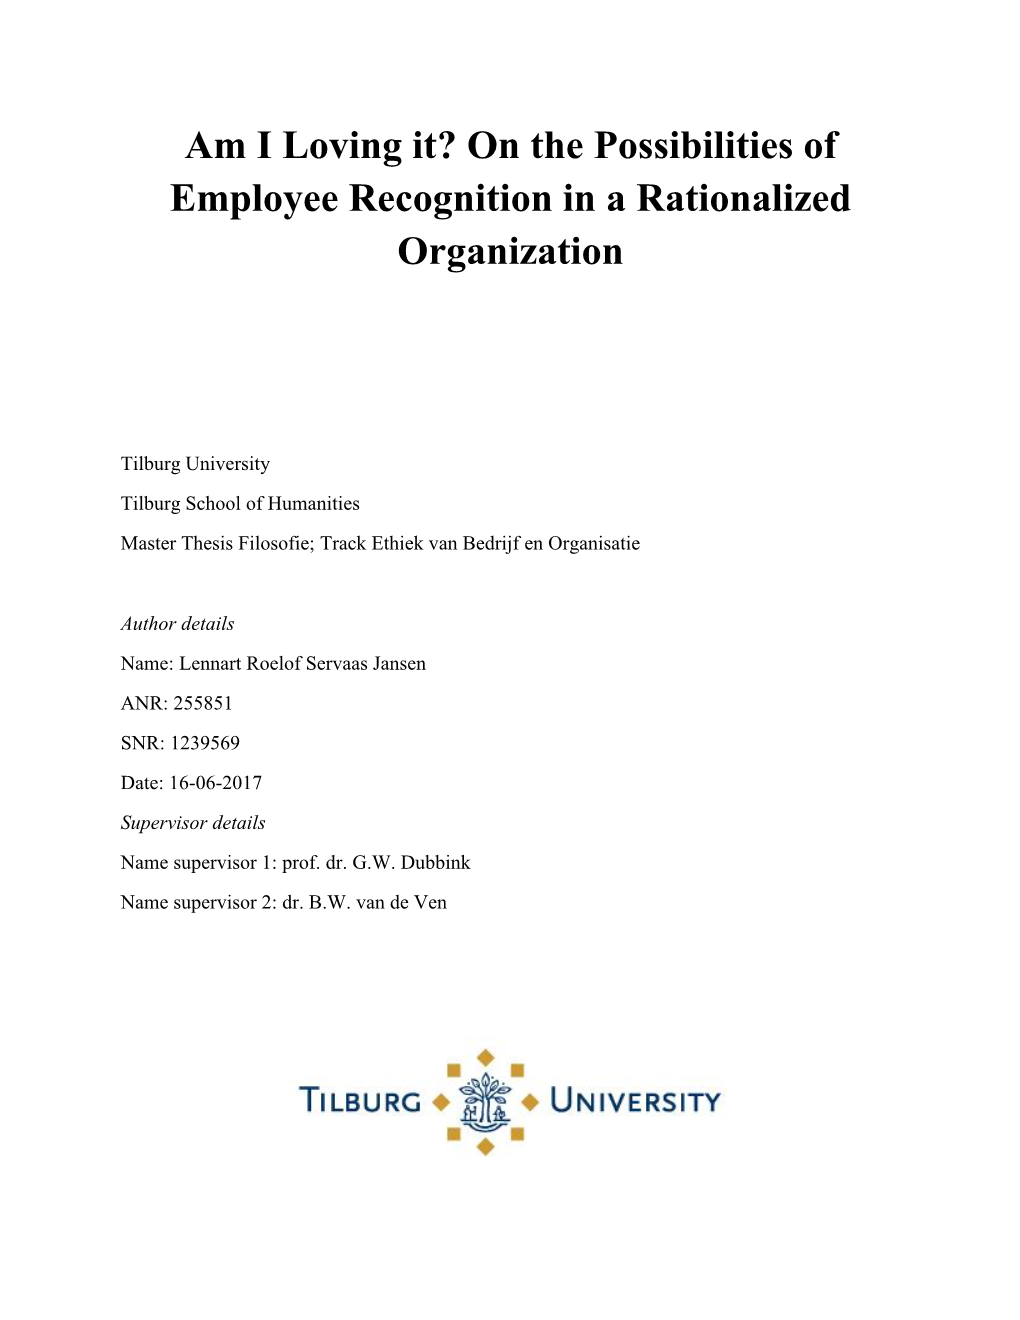 On the Possibilities of Employee Recognition in a Rationalized Organization